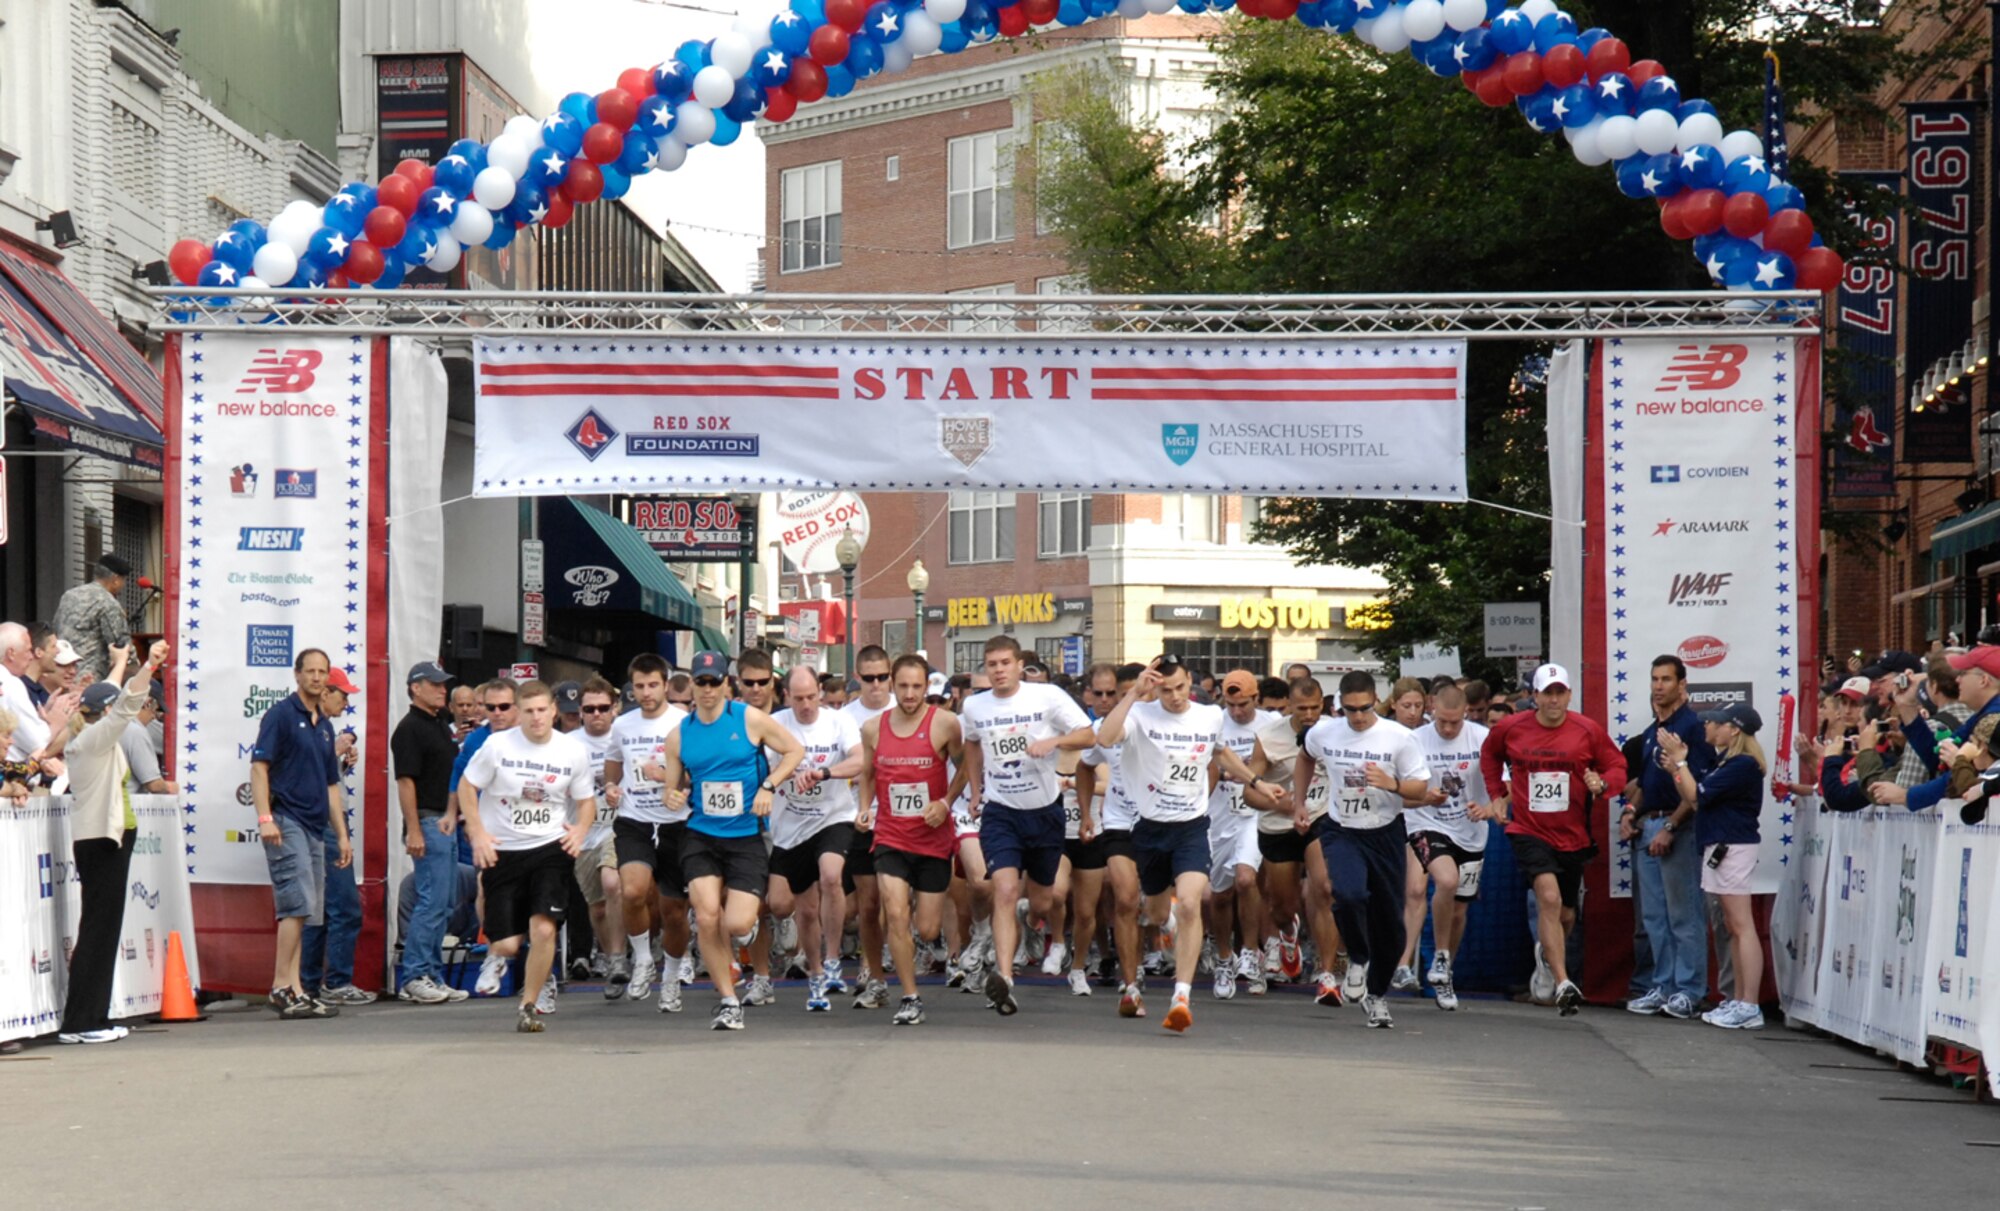 BOSTON – Participants in the Run to Home Base 9K race pour across the Yawkey Way starting line on May 23. More than 2000 runners each donated $1,000 to compete in the race and cross the finish line at Fenway Park’s home plate. The donations will benefit the Home Base Program, which offers treatment, research and counseling to Iraq and Afghanistan veterans suffering from traumatic brain injuries and deployment-related stress disorders. Army Chief of Staff Gen. George W. Casey and Massachusetts Lt. Gov. Tim Murray were in attendance.  (U.S. Air Force photo by Rick Berry)